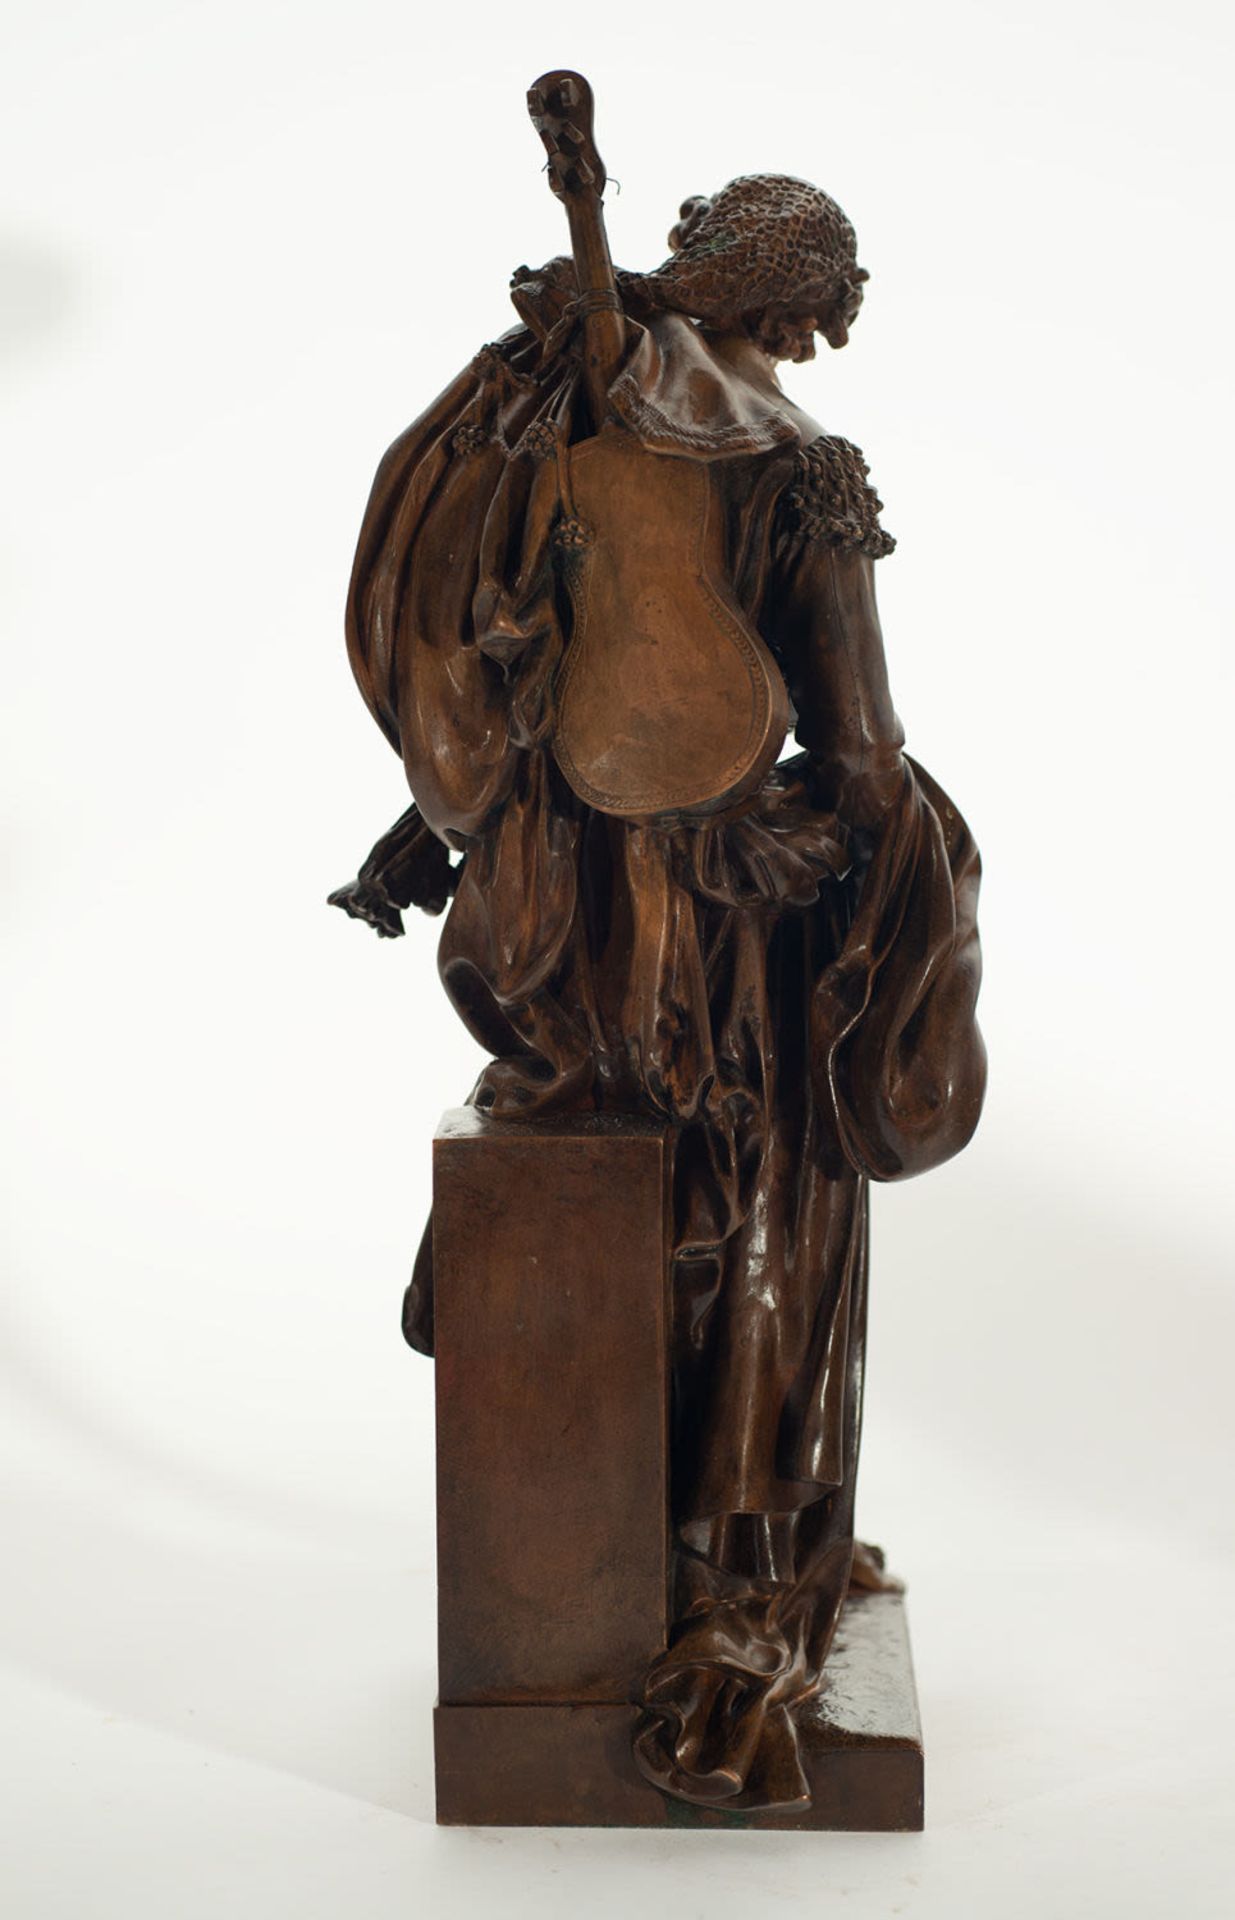 Bronze sculpture by Figaro, signed Boisseau, 1875. 19th century French school - Image 4 of 4